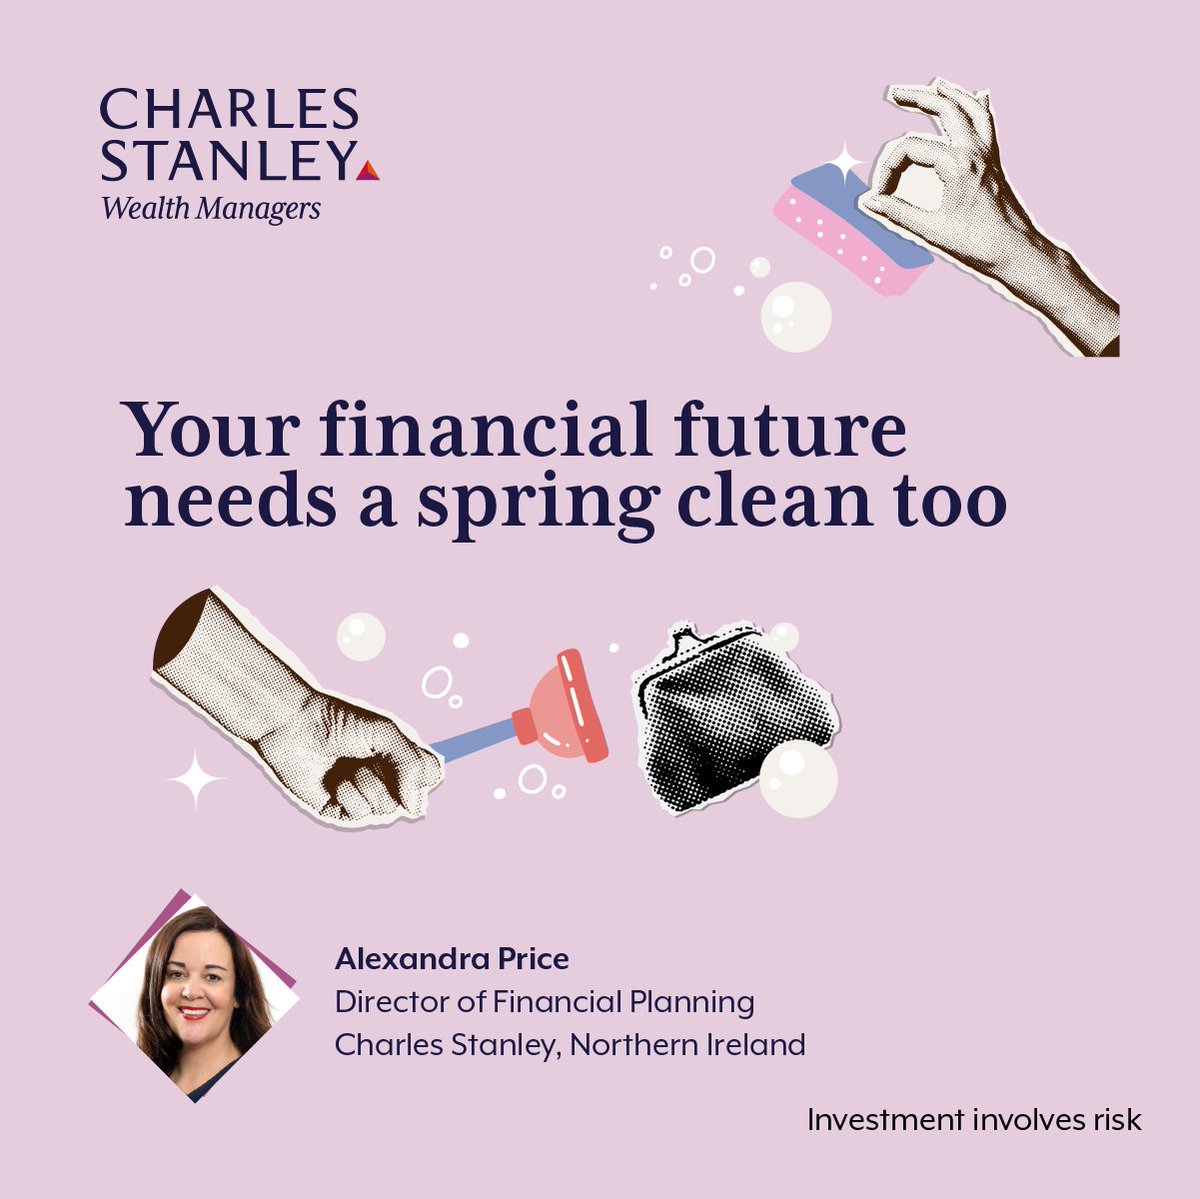 The new financial year provides the ideal opportunity to look further ahead and ensure an appropriate and well-maintained financial plan is in place. Alexandra Price, Director of Financial Planning explores ➡️bit.ly/3V8Ckwp